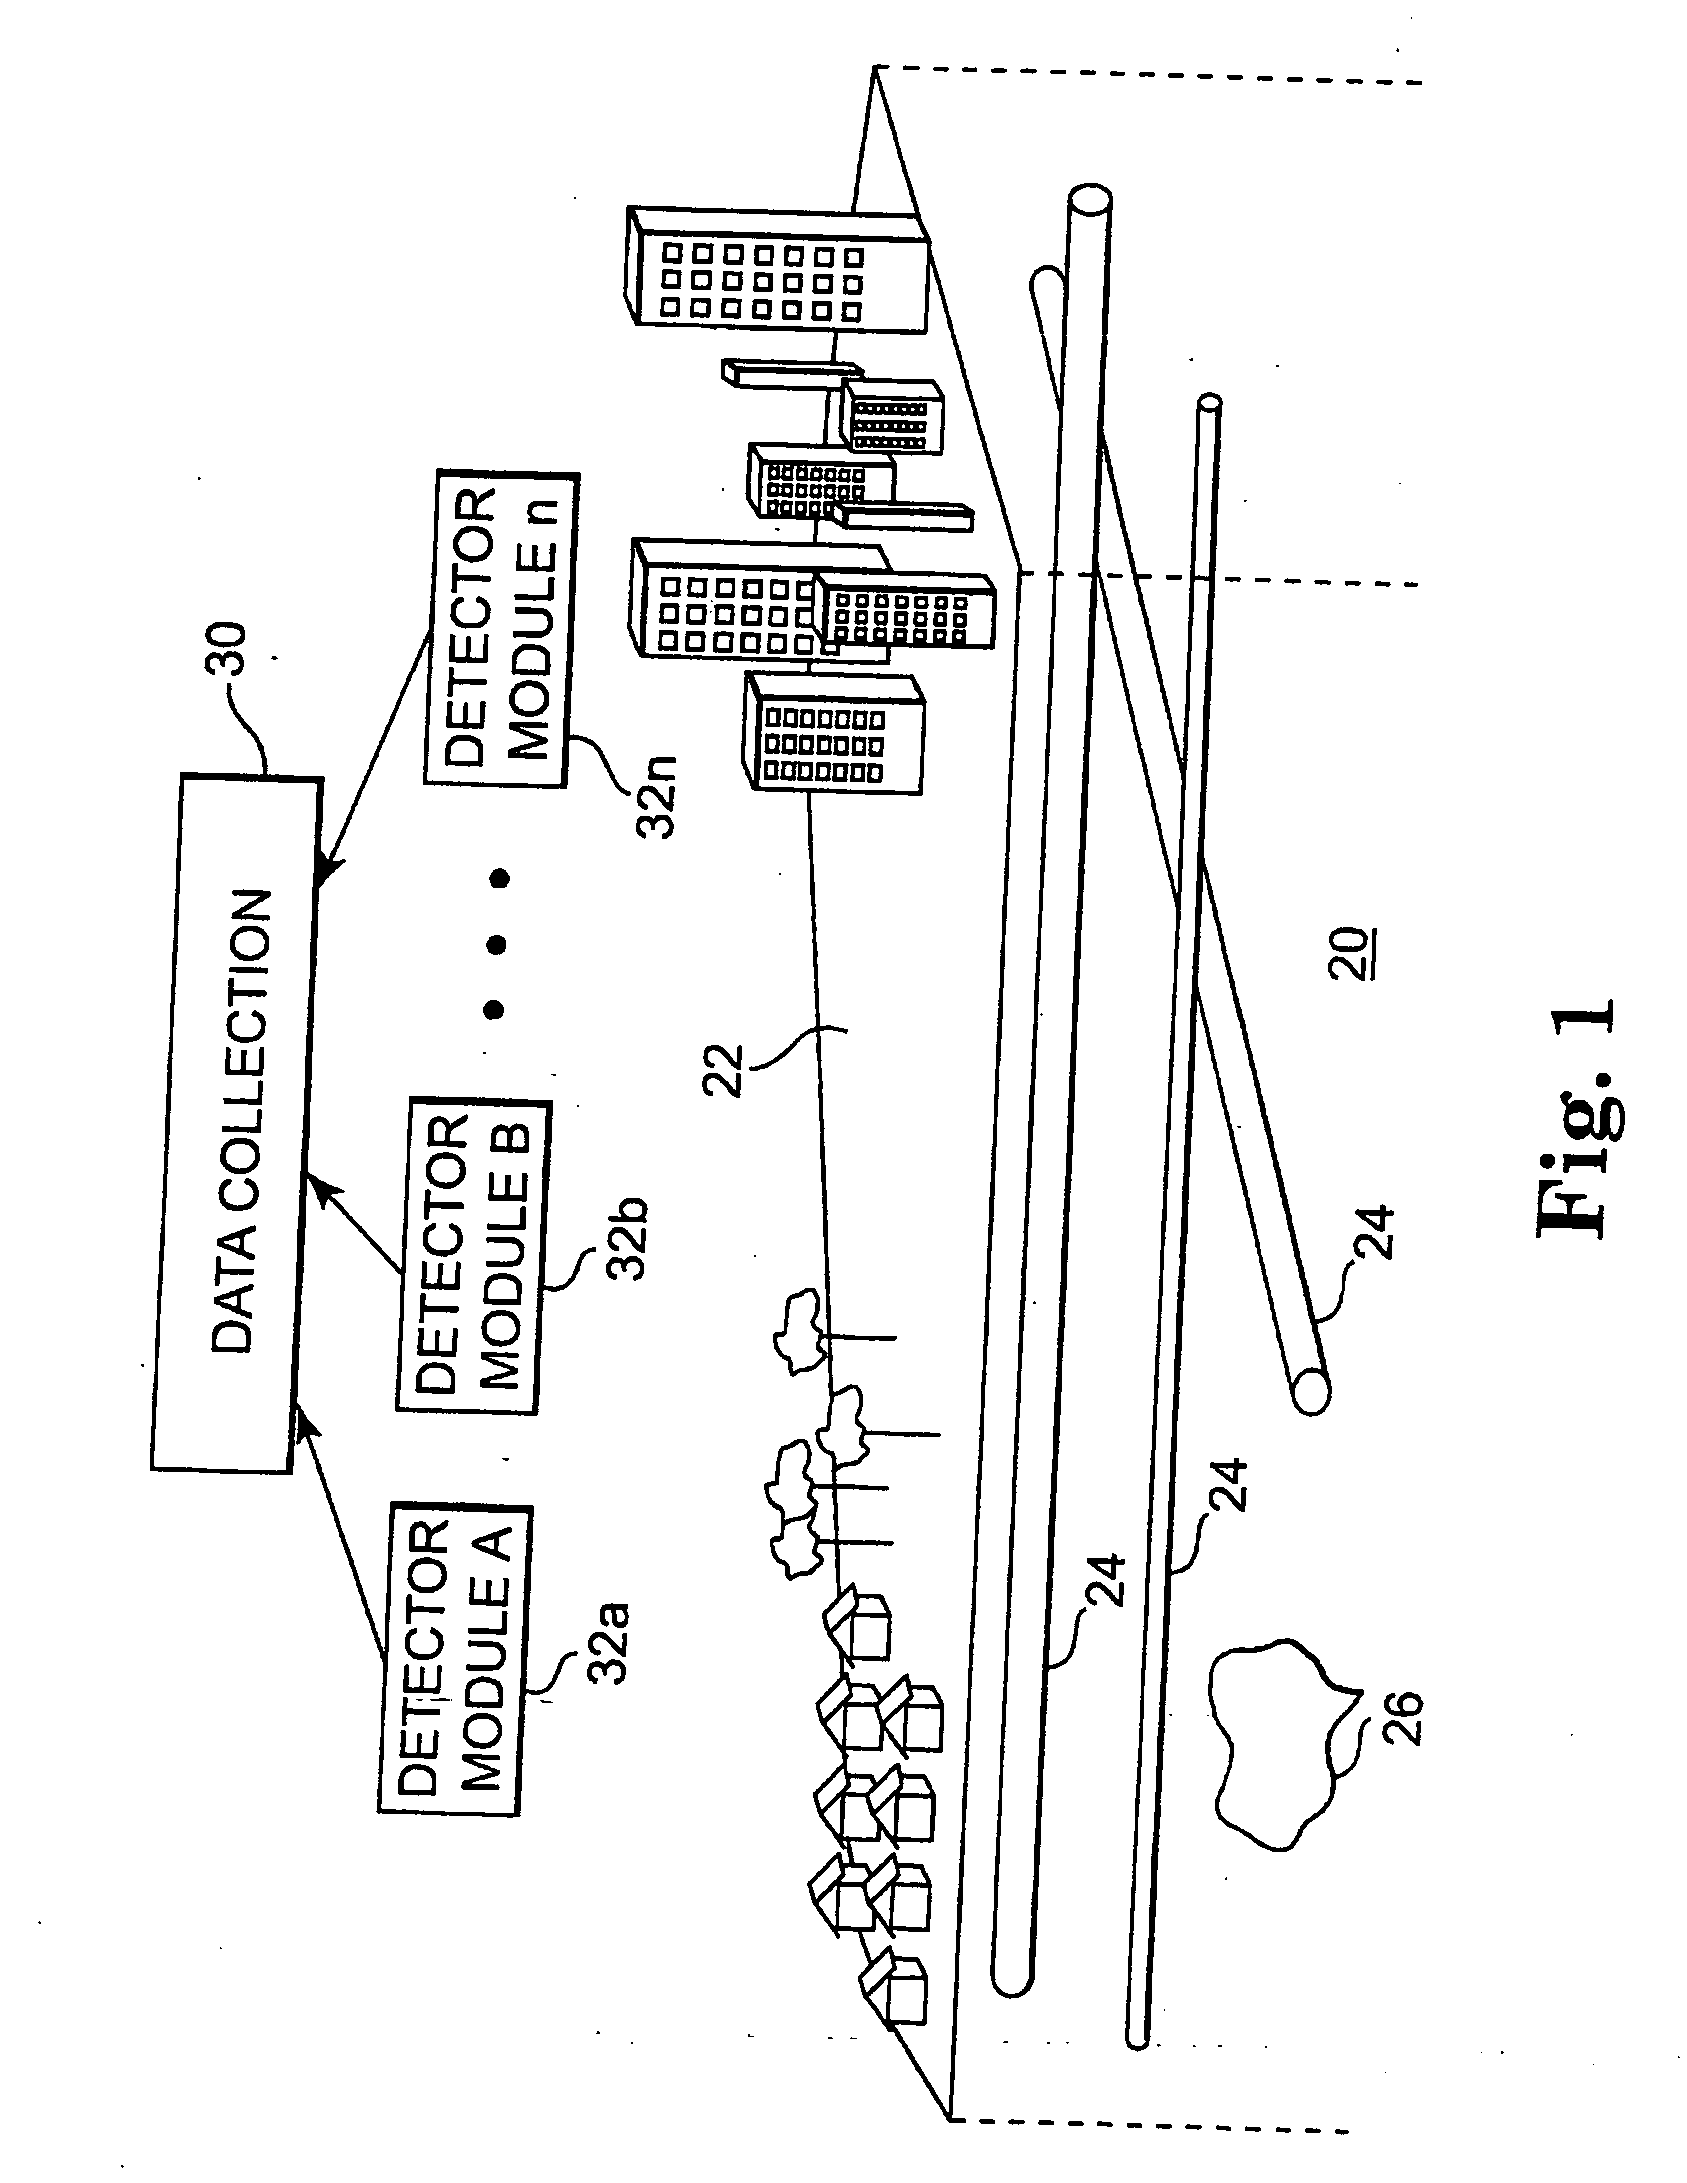 Utility mapping and data distribution system and method